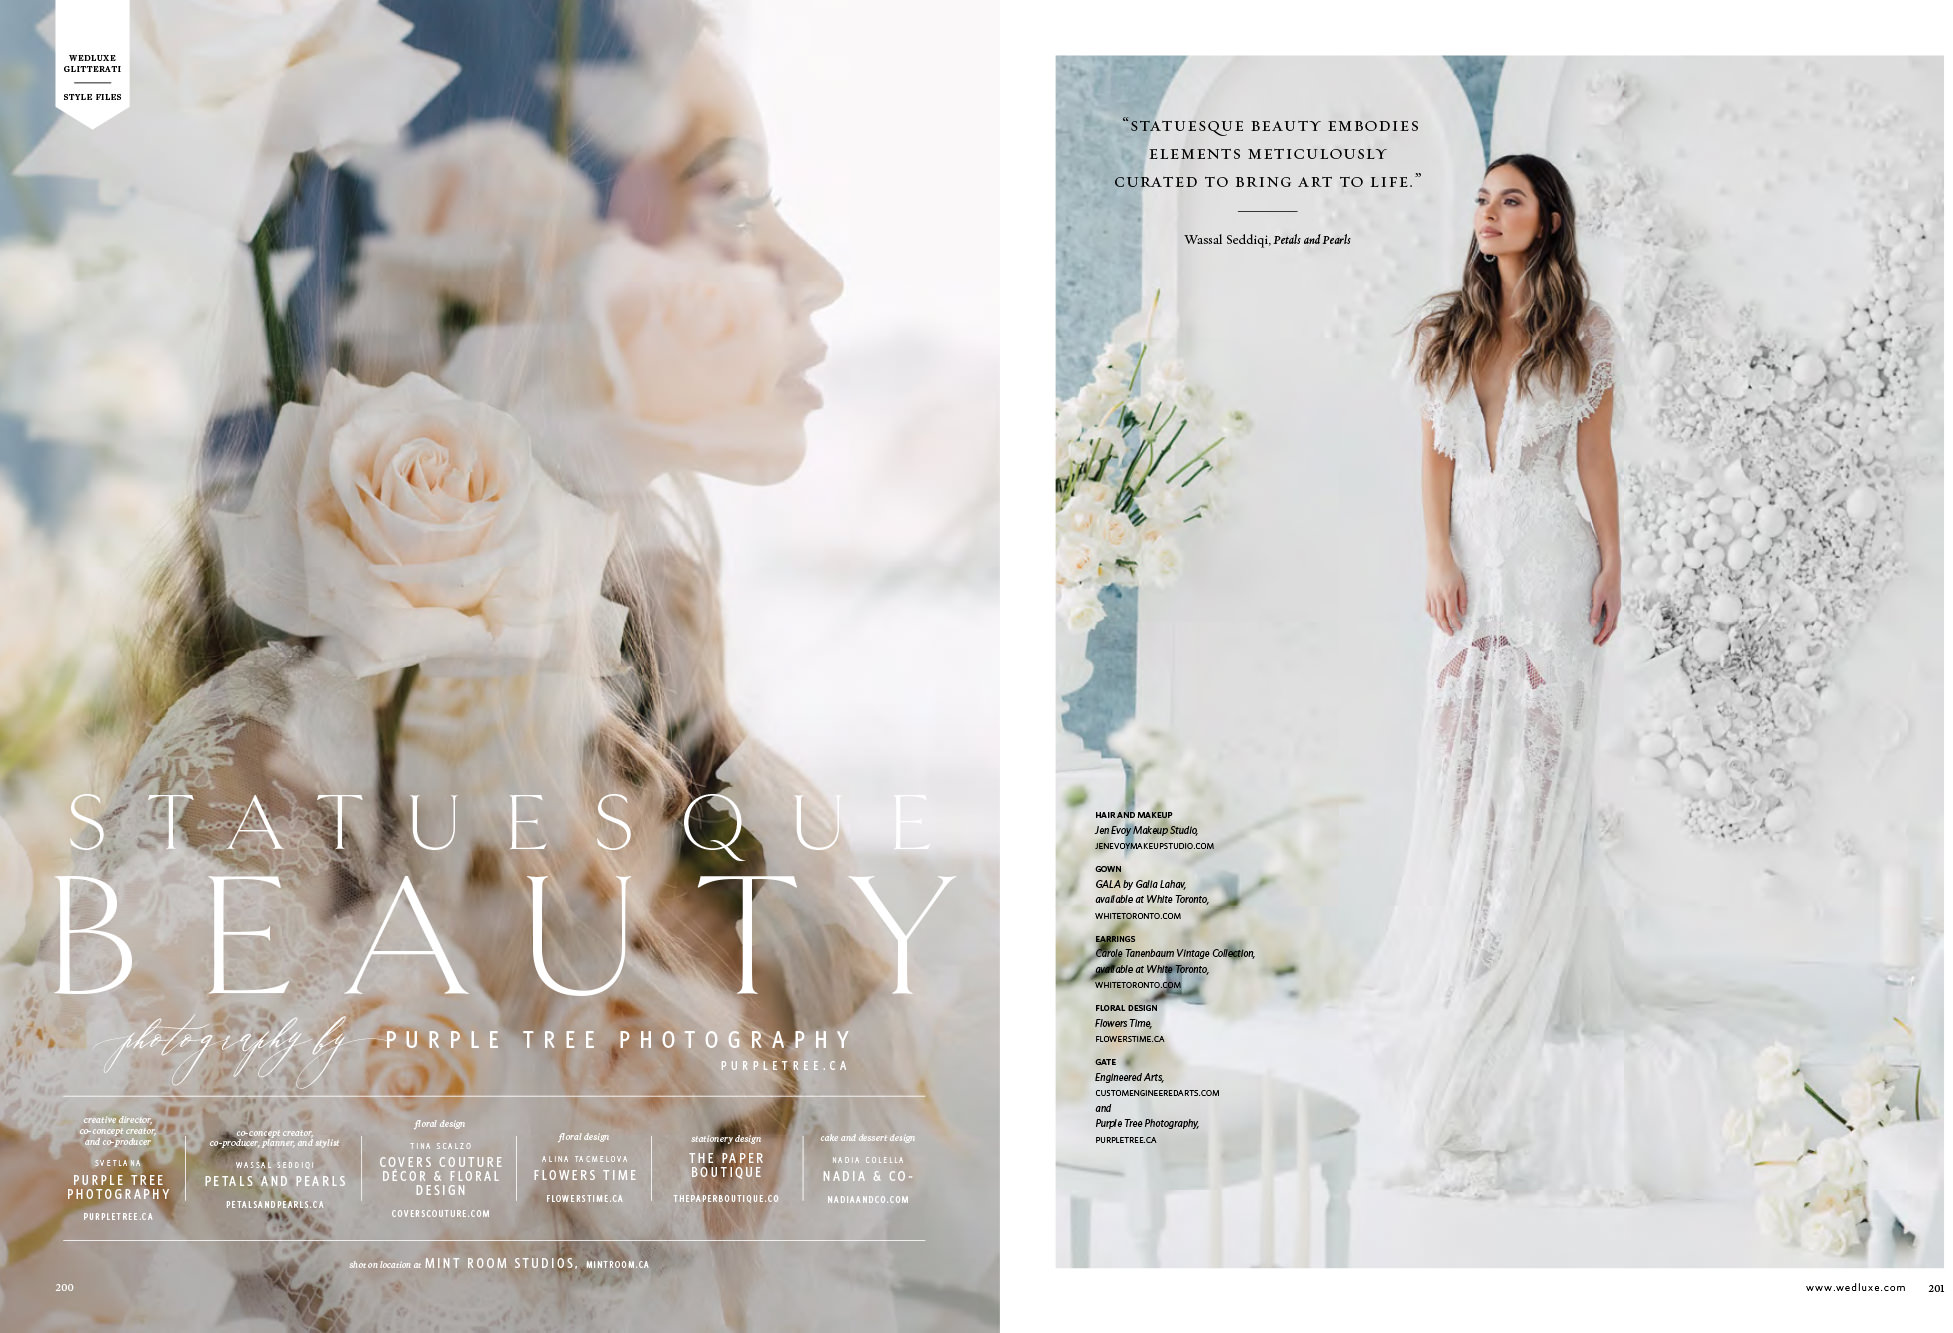 Creative for Wedluxe